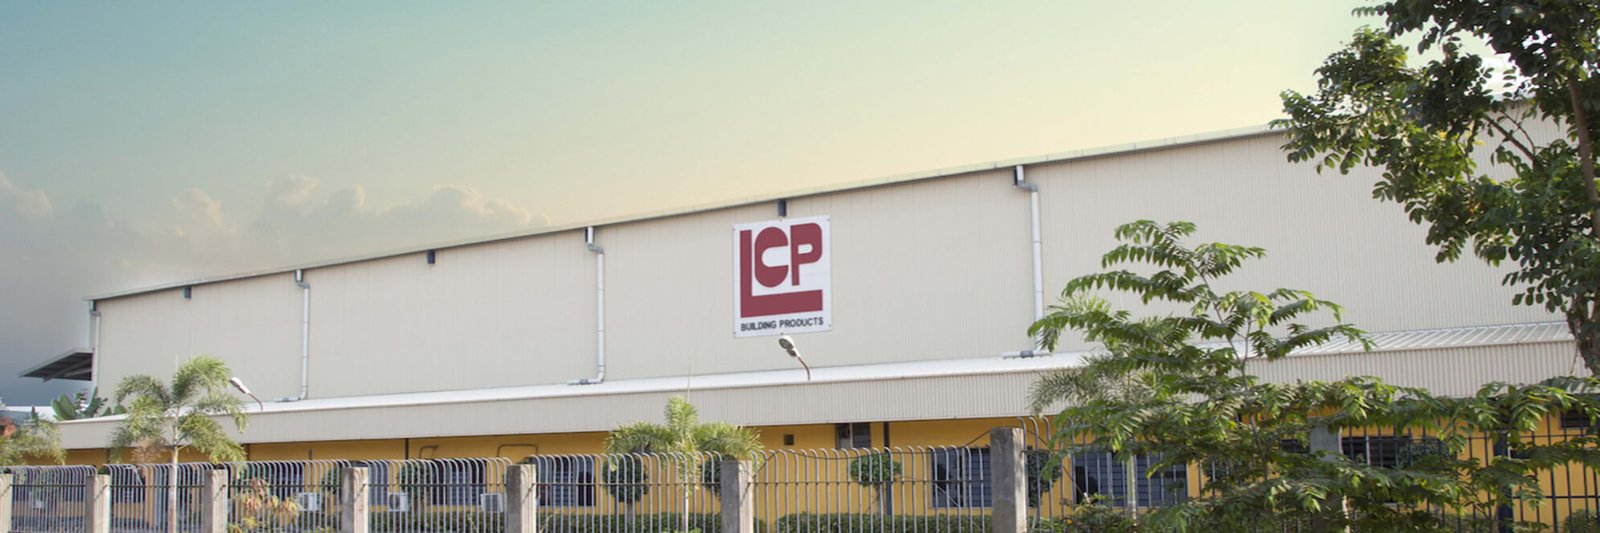 best roof sheet manufacturer in Hyderabad: LCP Sliders